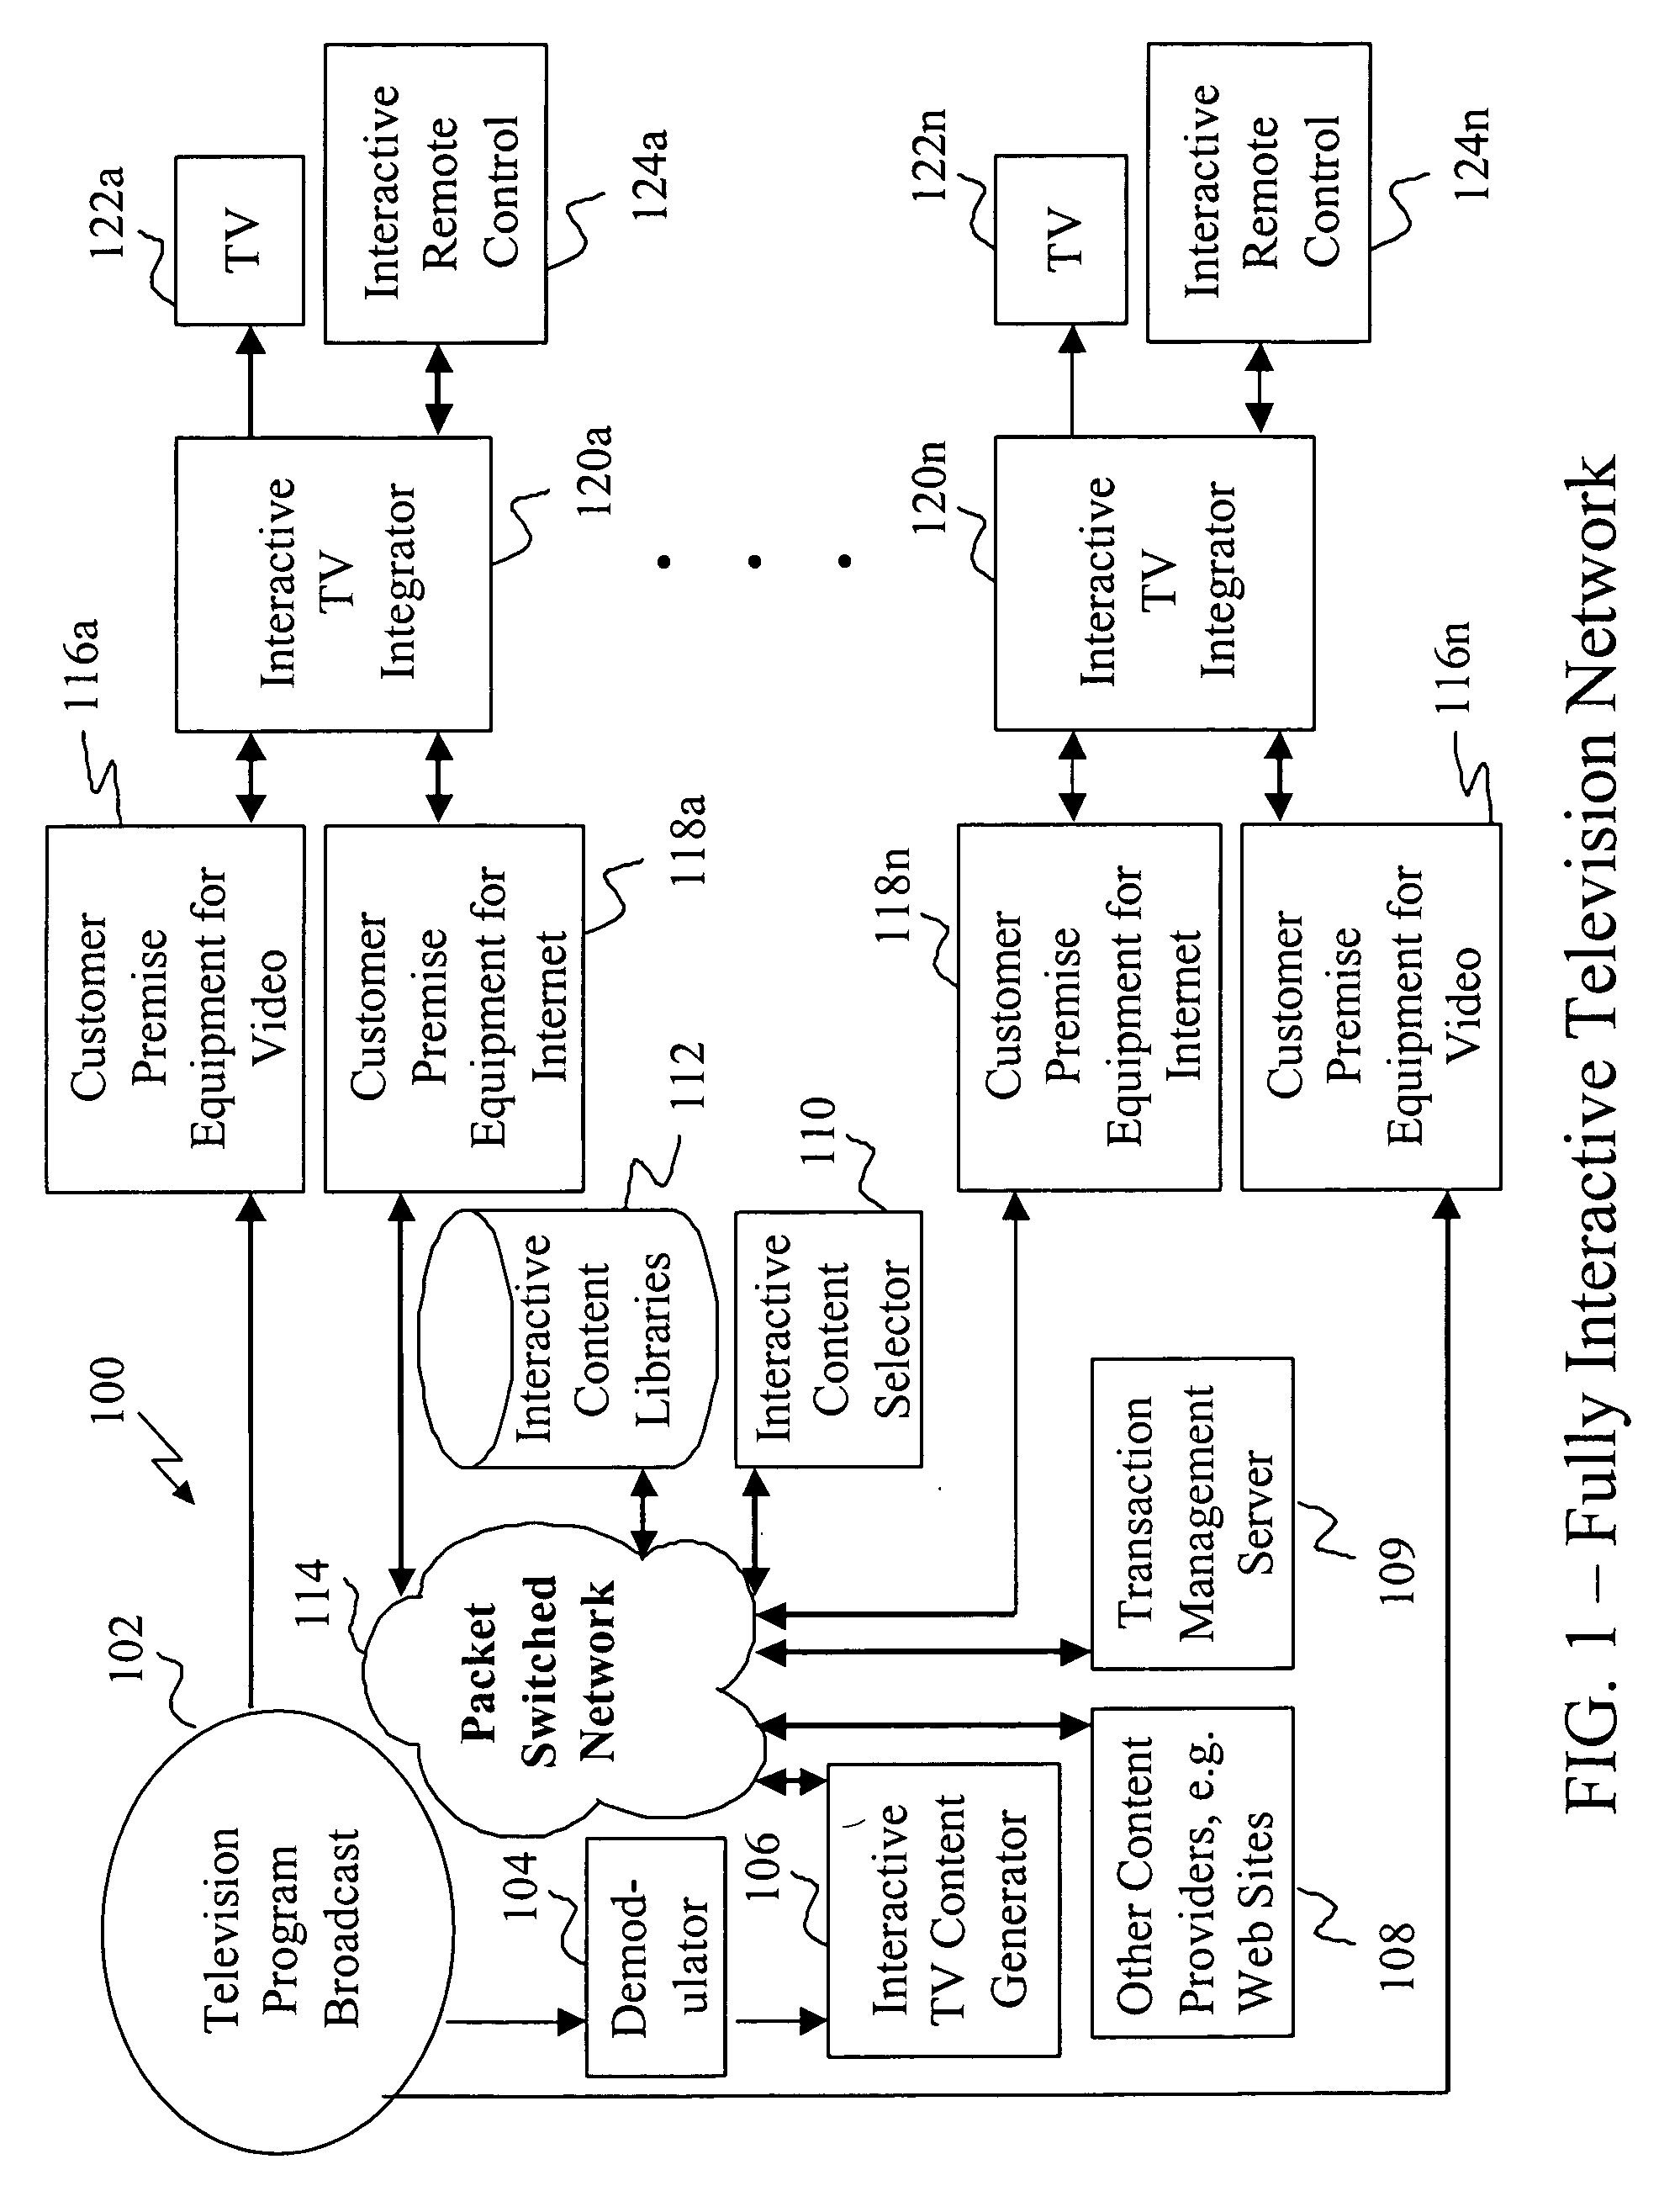 System and method for interaction with television content